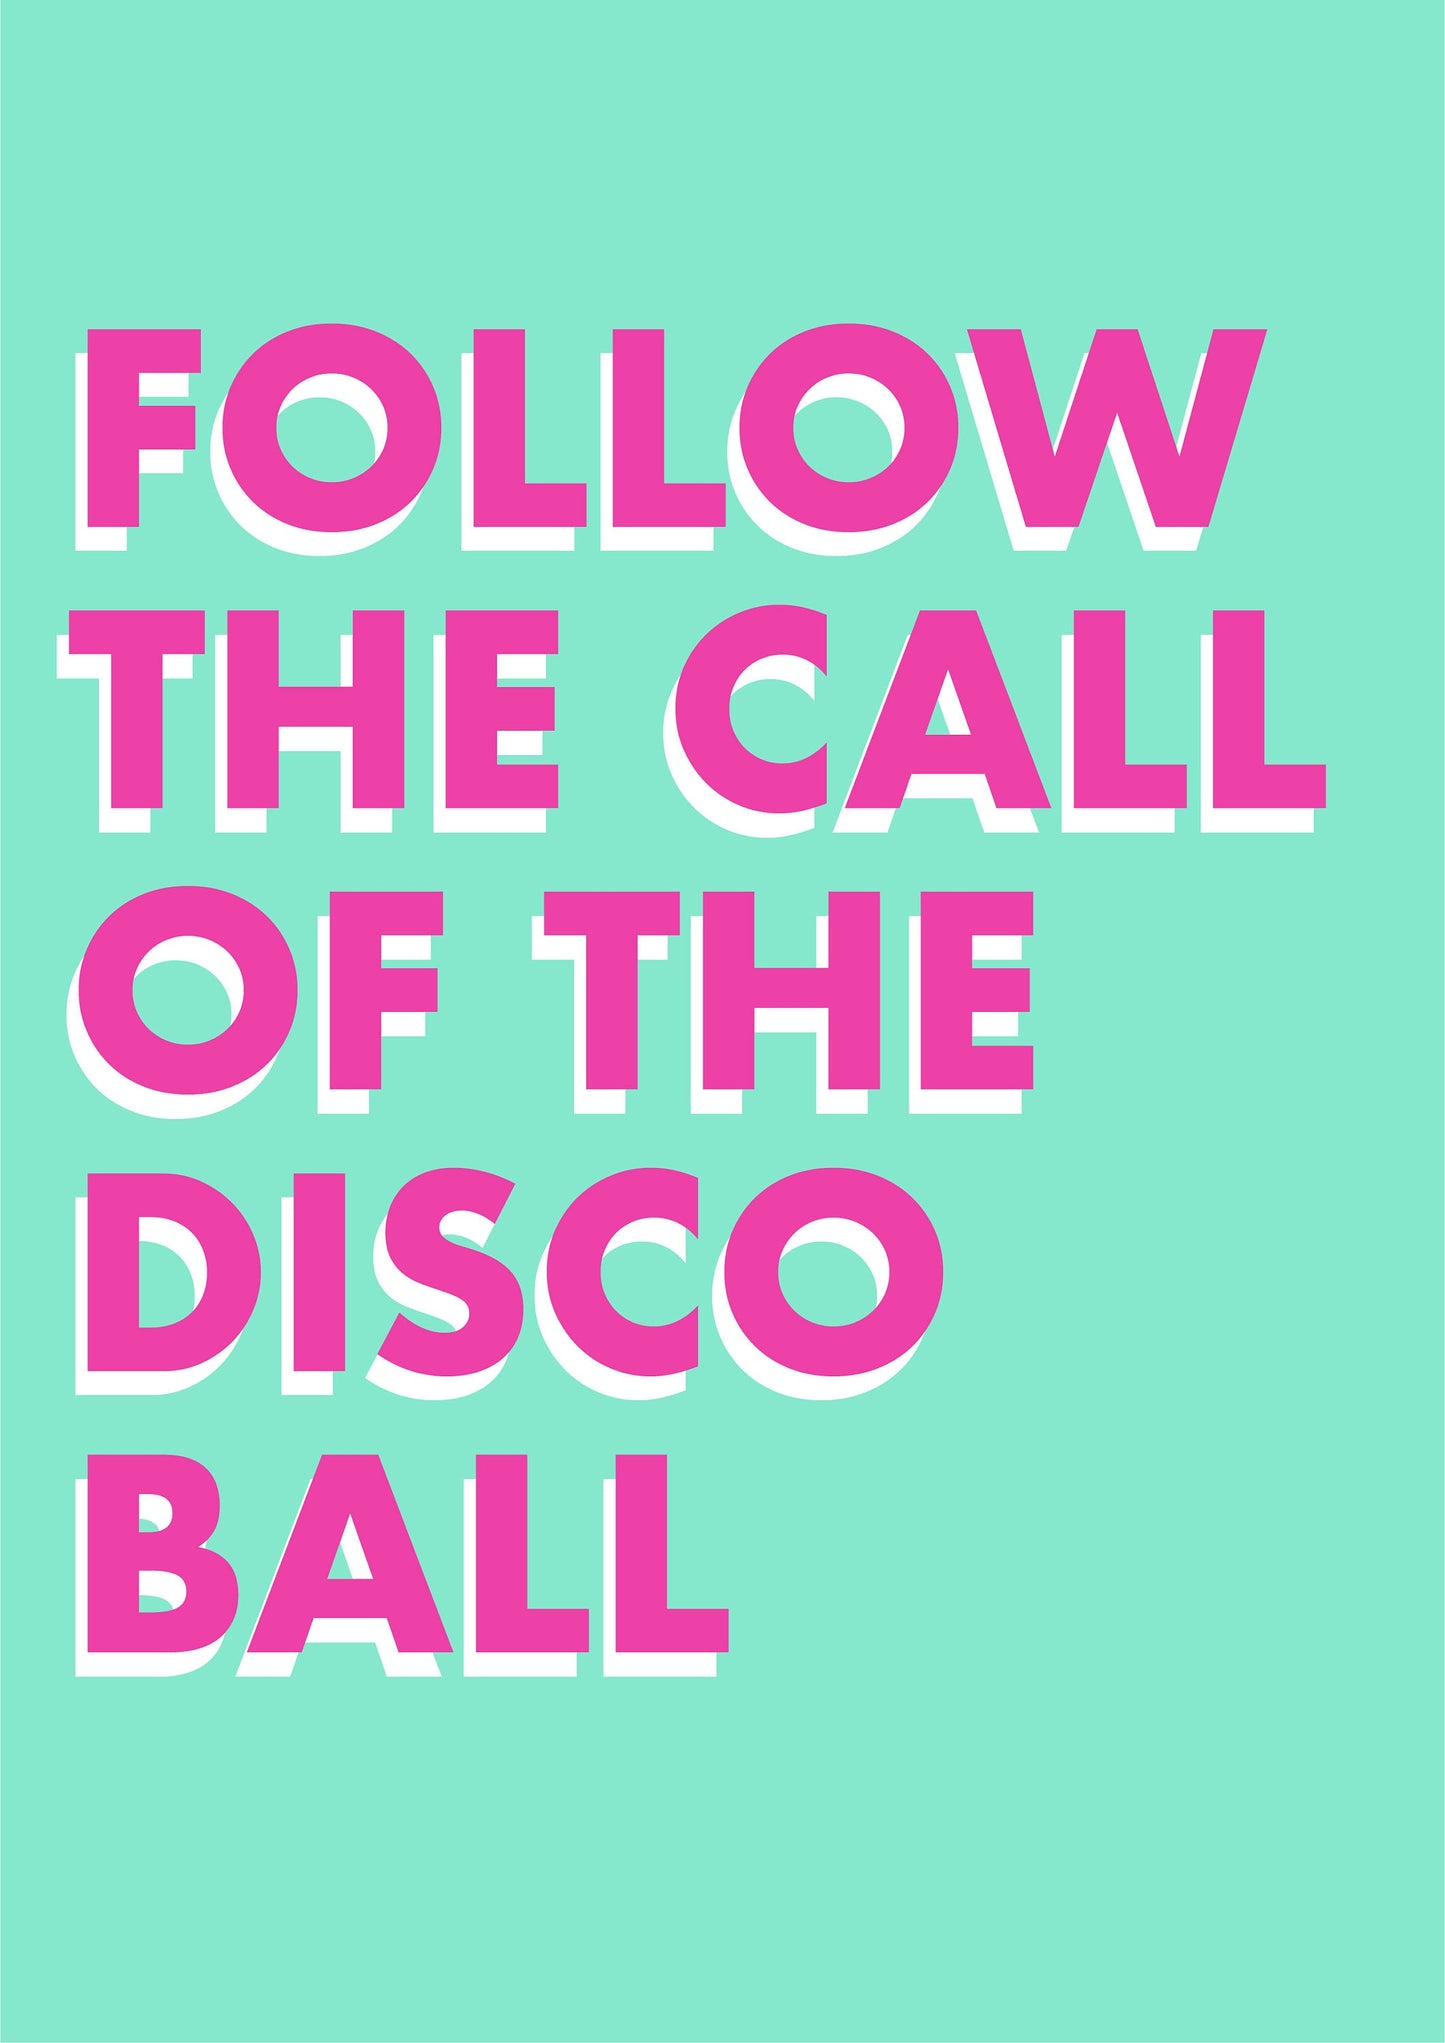 Follow The Call of The Disco Ball Bar Typography Print